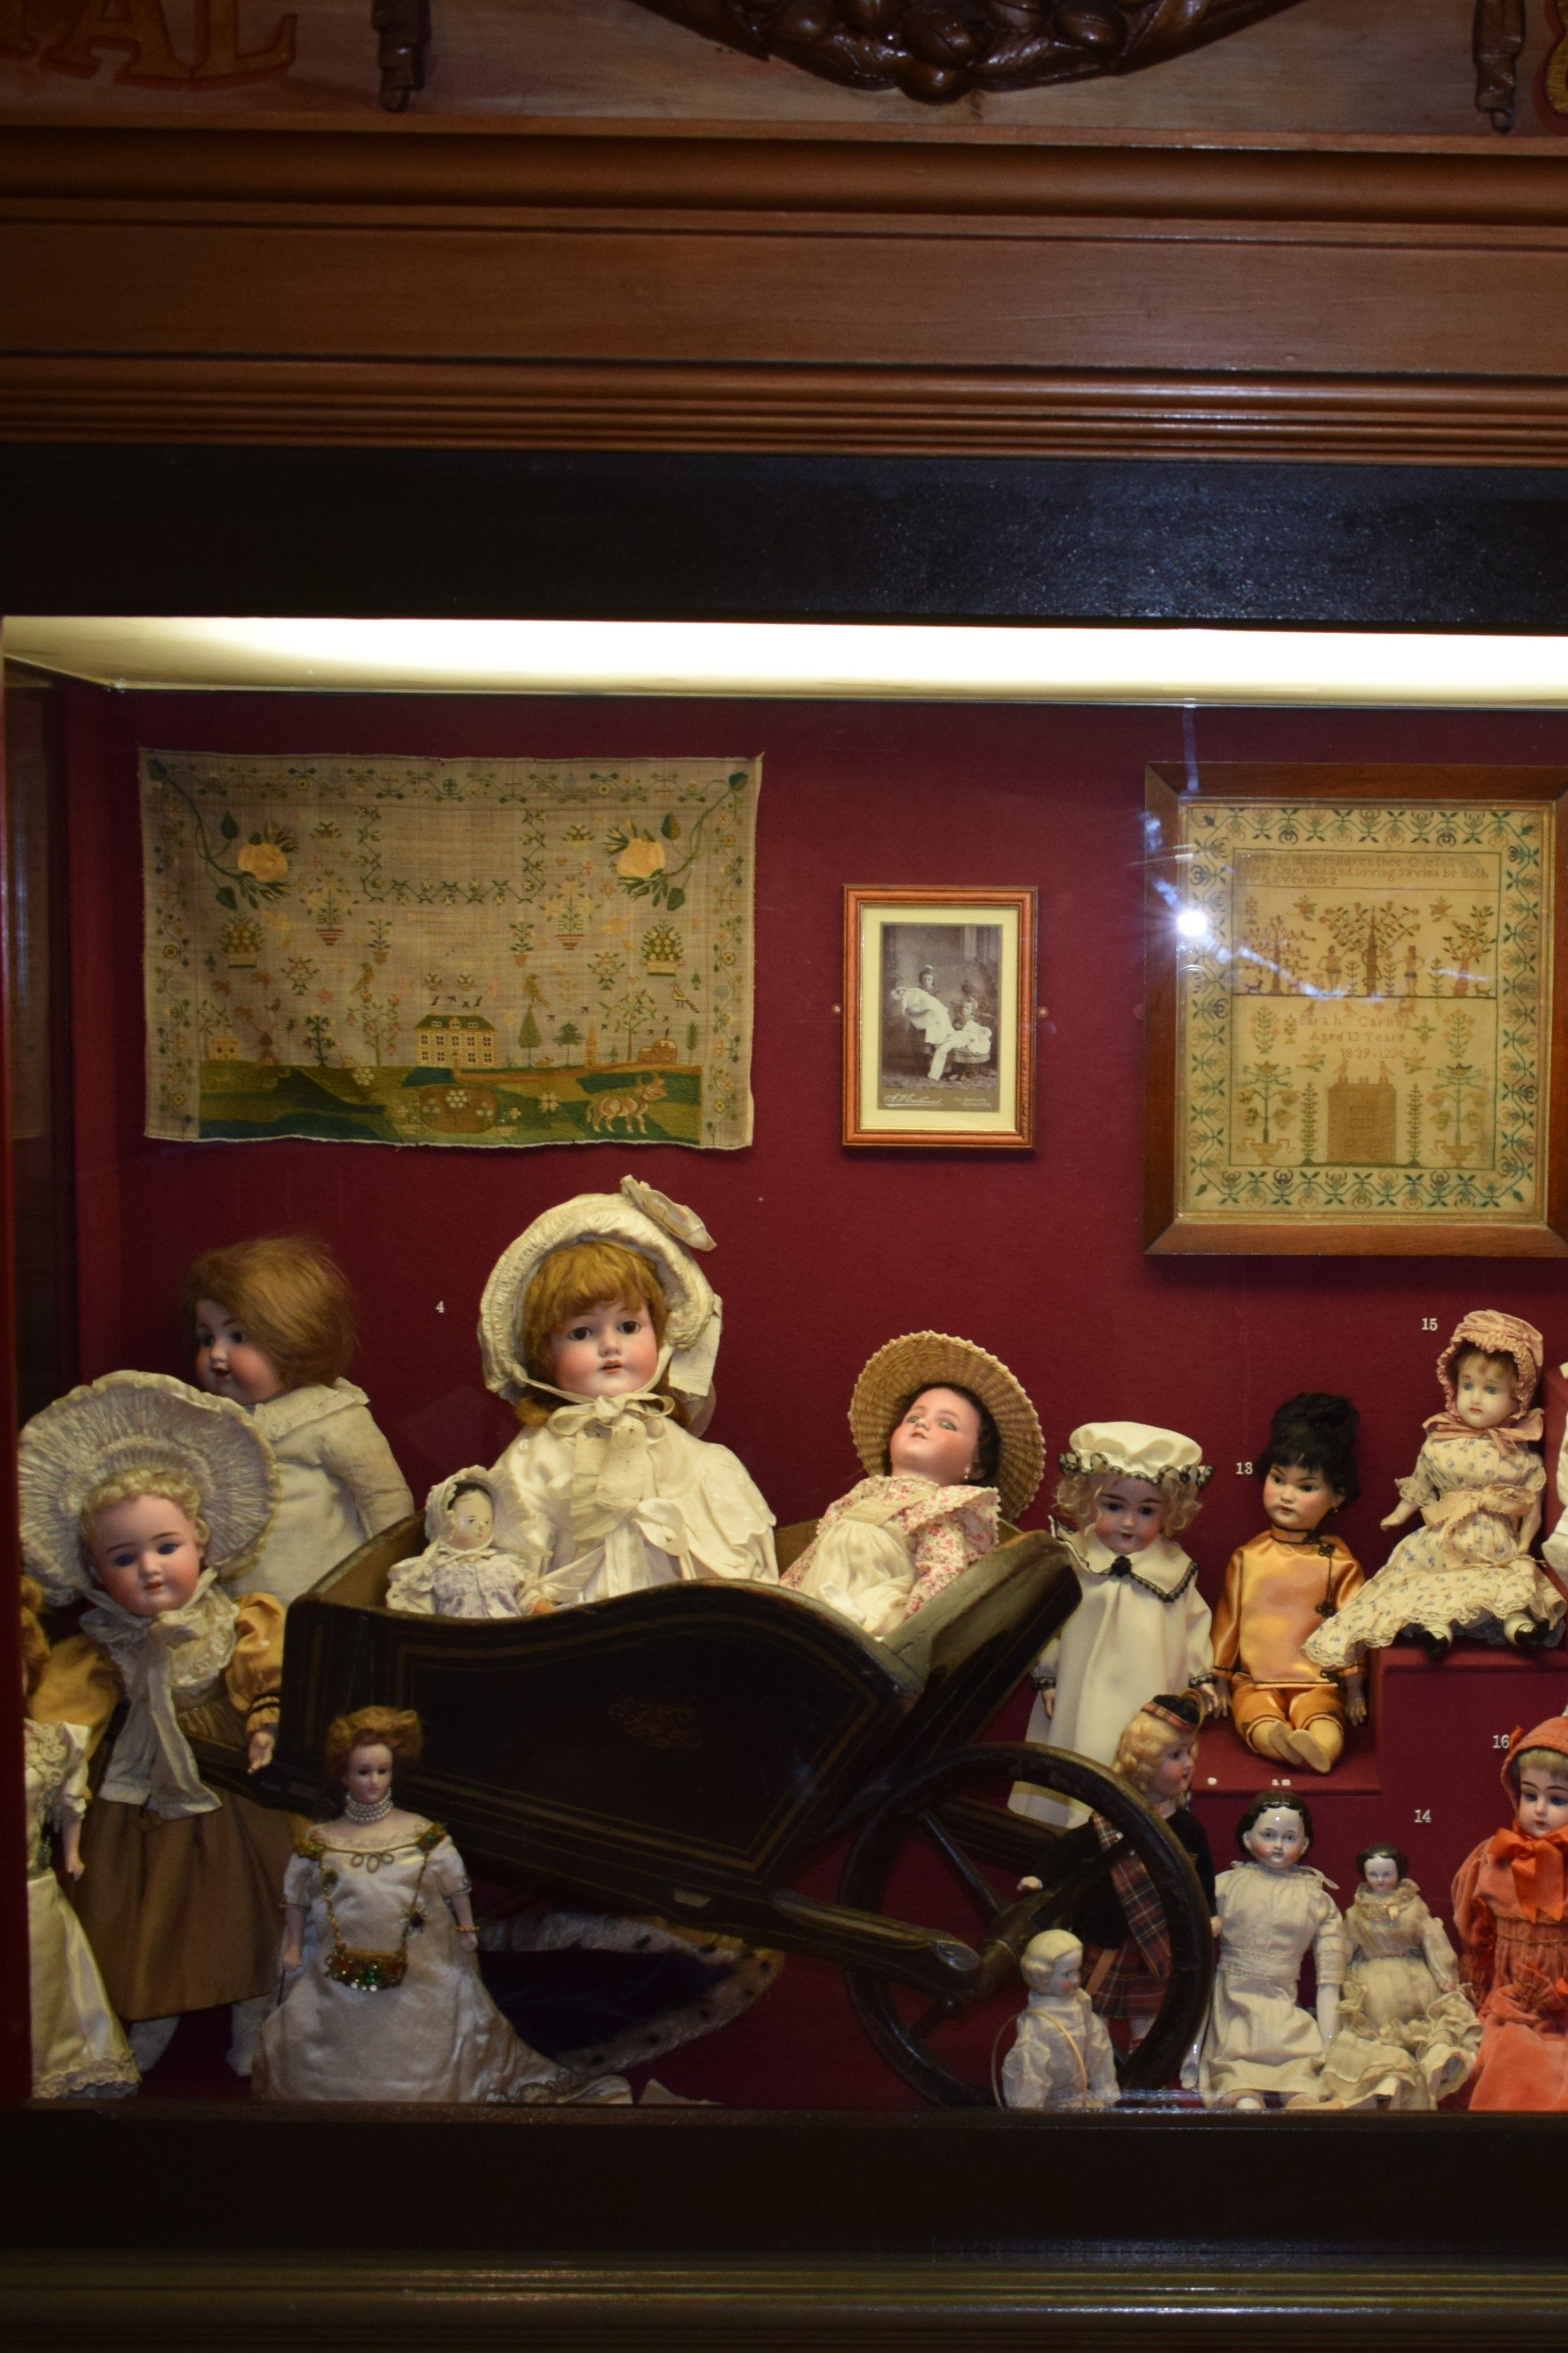 Some Victorian dolls fromt he toy collection in the second building.